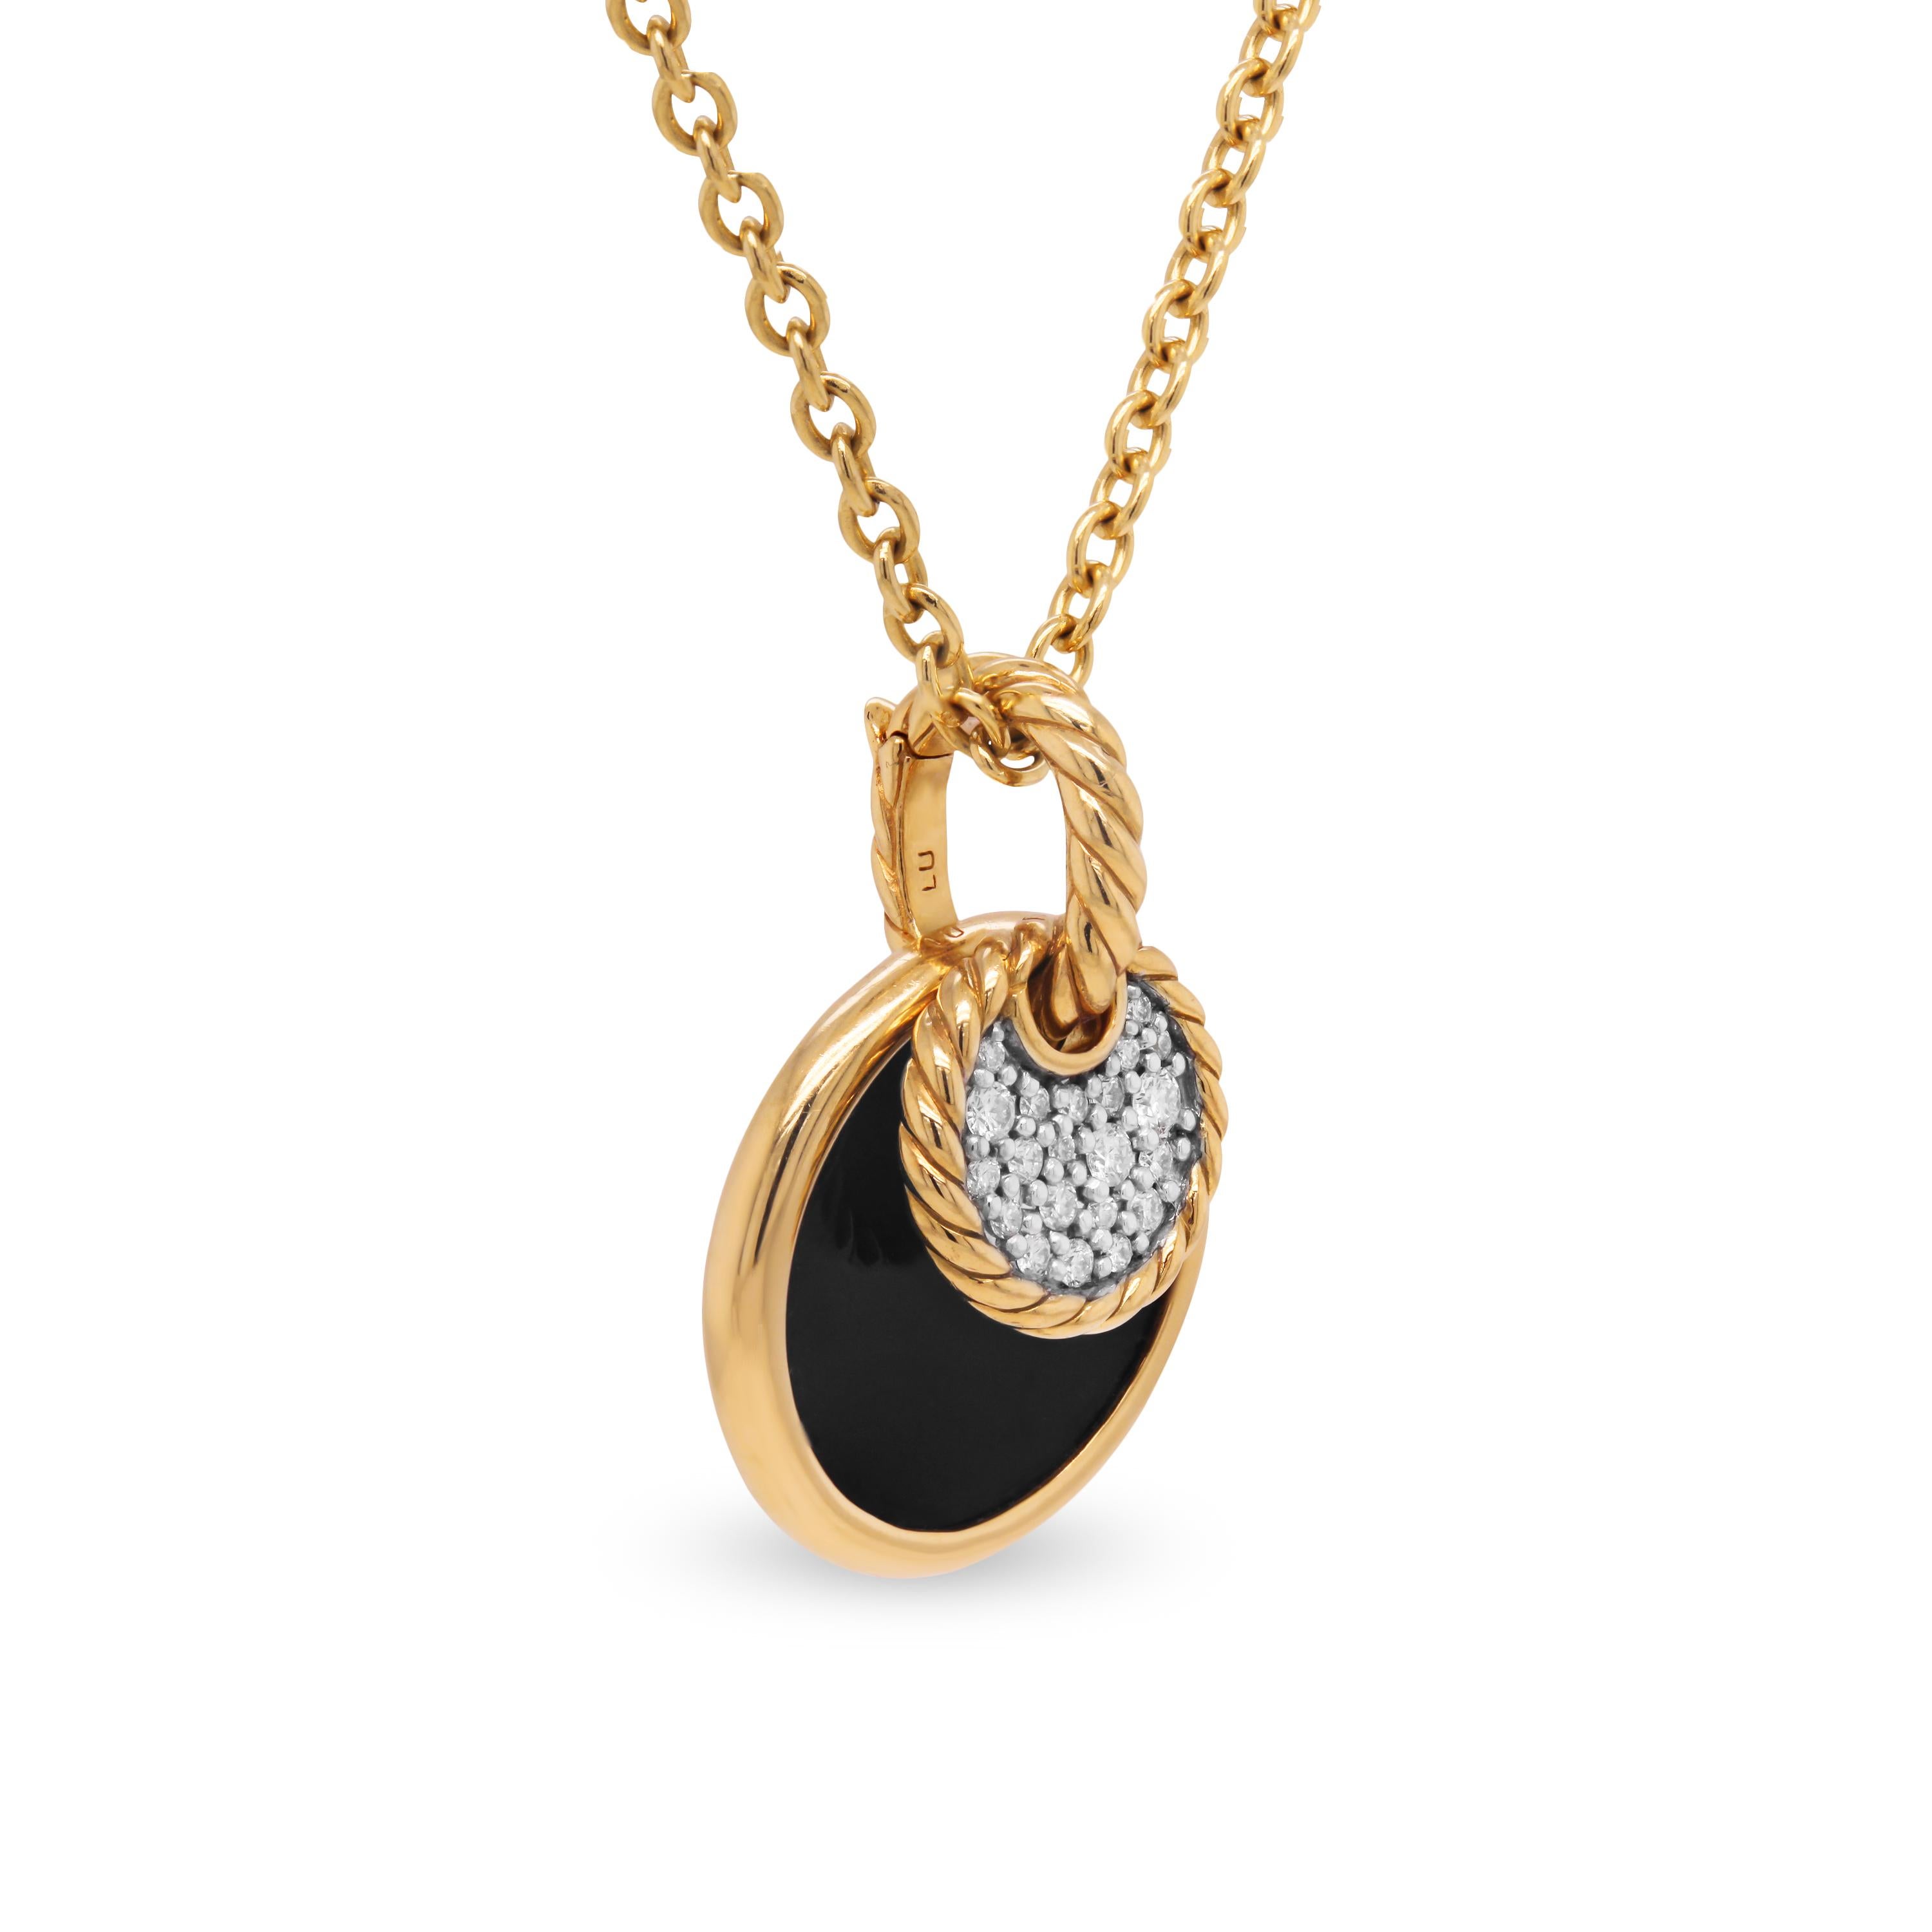 David Yurman 18K Gold DY Elements® Onyx Mother of Pearl Diamond Pendant Necklace

From the DY Elements® collection by David Yurman. The pendant is double-sided, convertible and features black onyx on one side with mother of pearl on the other with